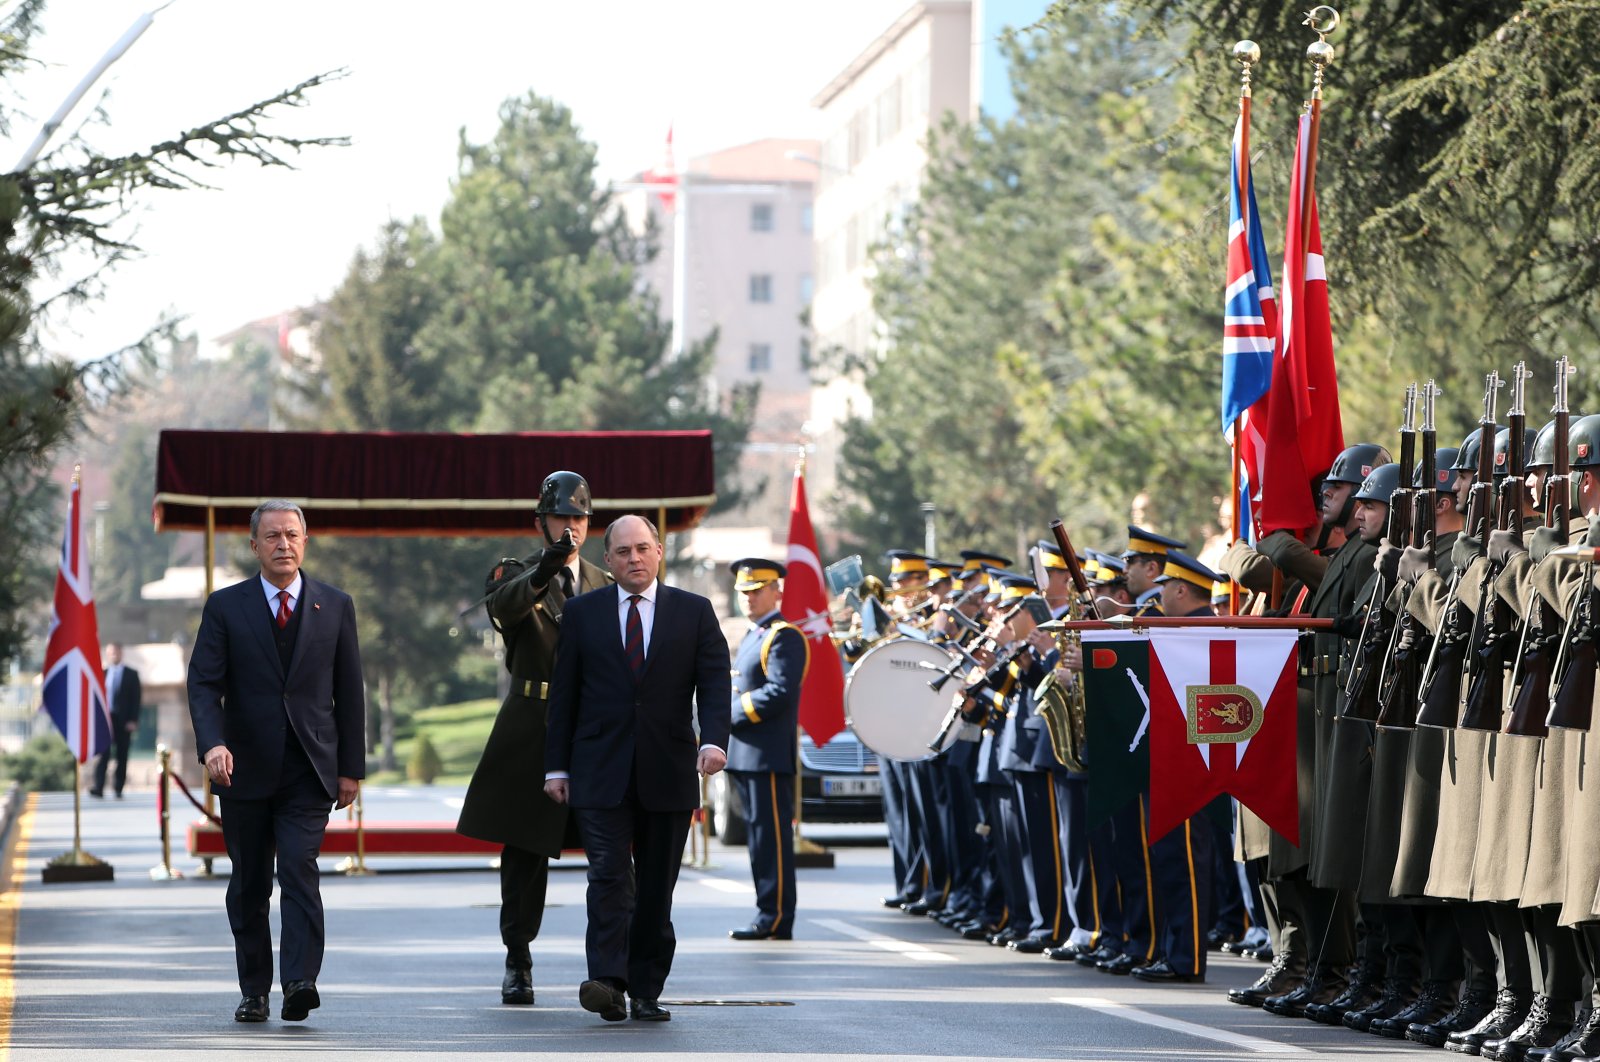 Defense Minister Hulusi Akar and his British counterpart Ben Wallace attend a military ceremony to welcome the delegation in Ankara, Thursday, March 12, 2020. (AA Photo)